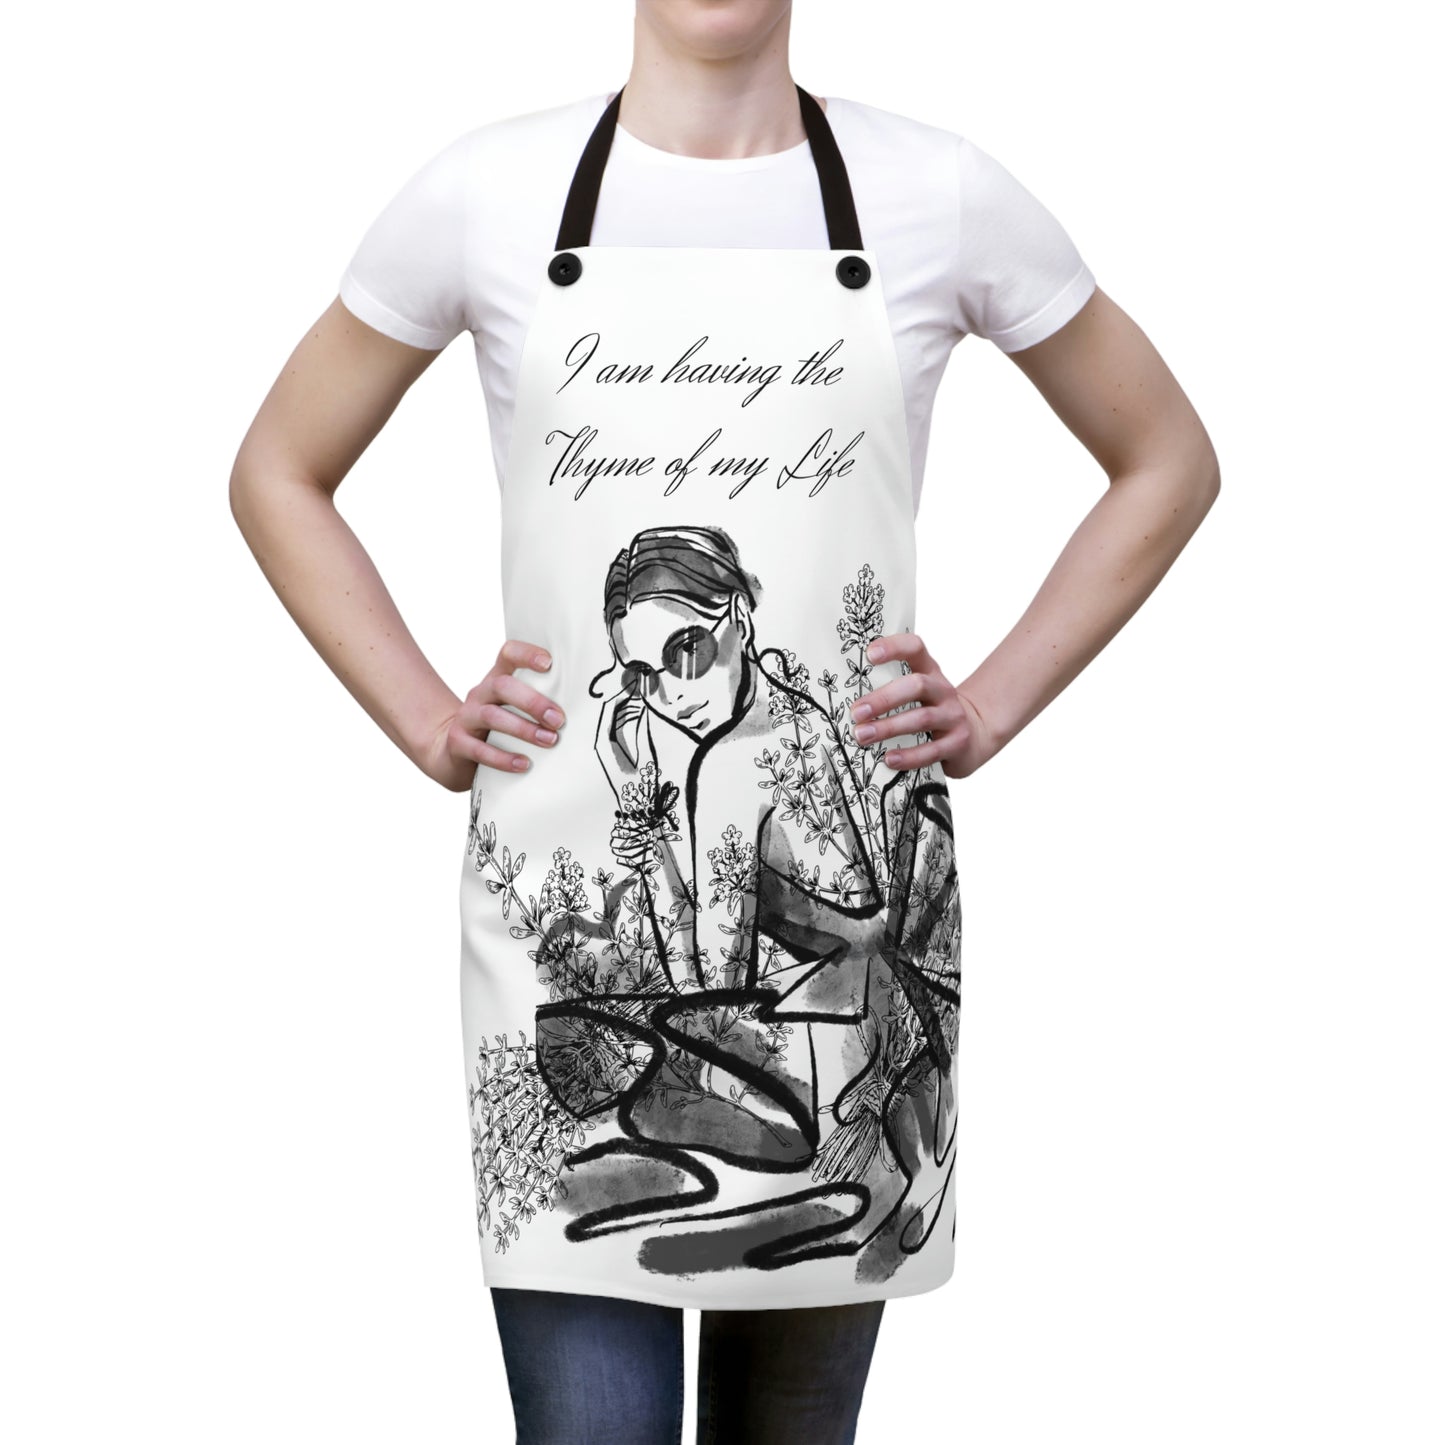 I am having the Thyme of my life - Fashion Apron